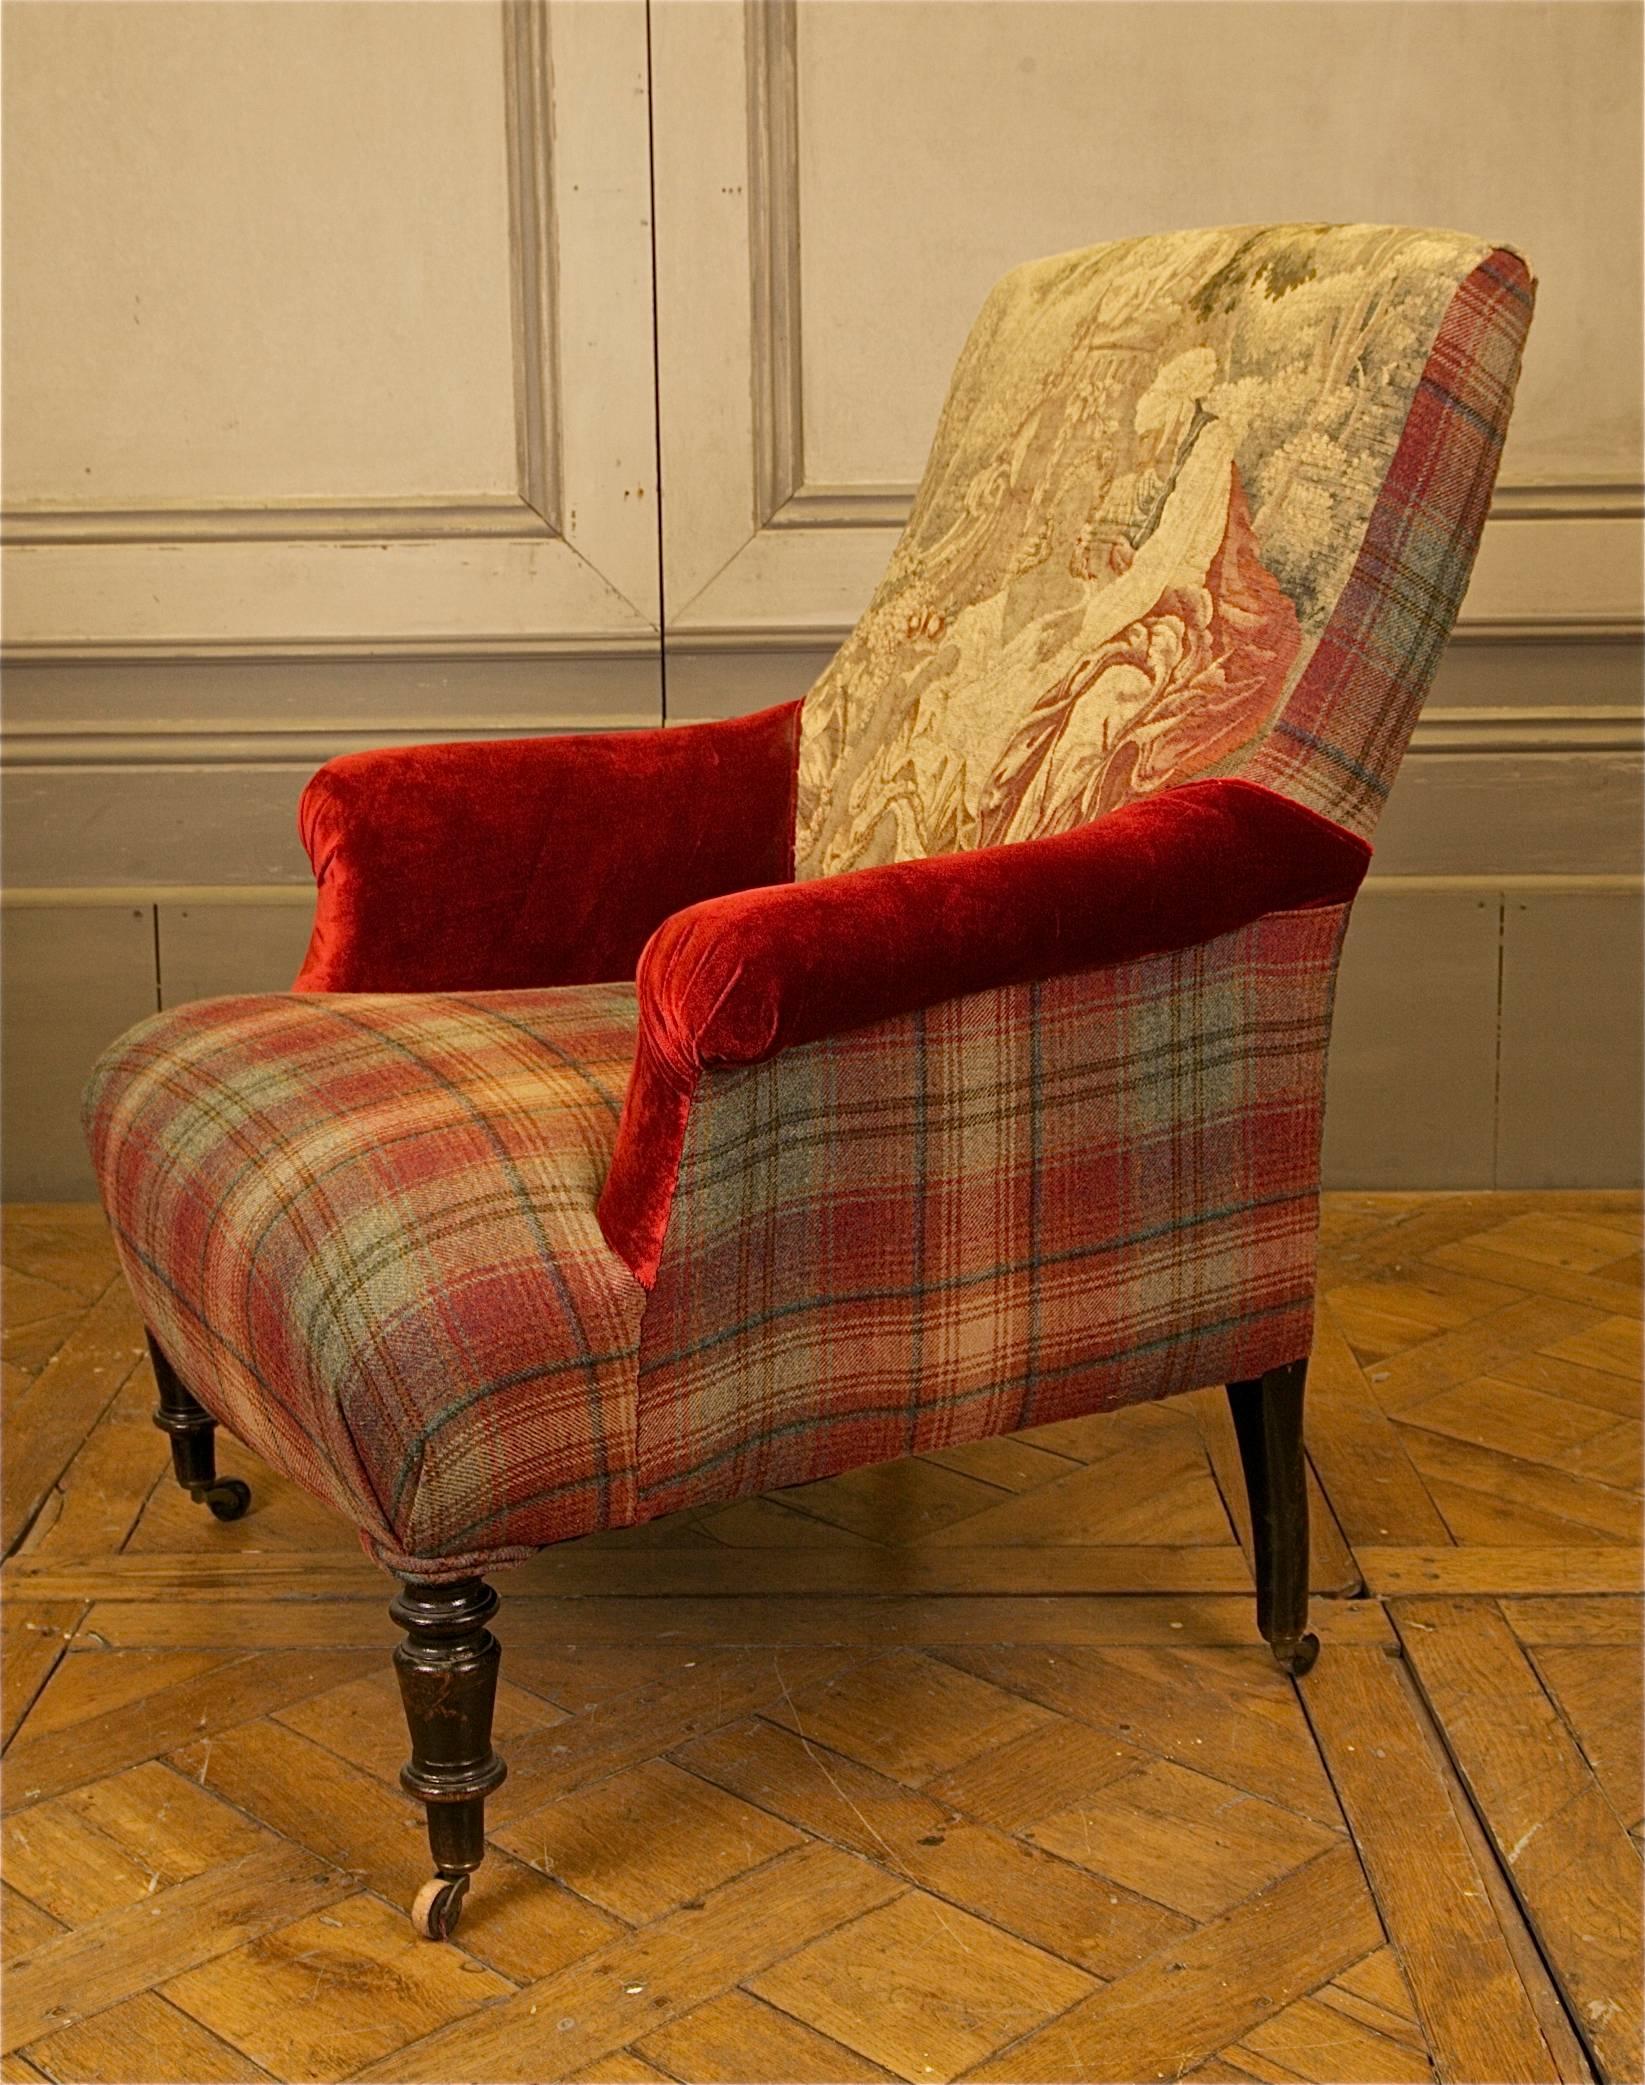 French, Napoleon III period armchair re-upholstered in the patchwork style using an 18th century Aubusson tapisserie displaying a romantic setting on the backrest along with red silk velvet and tartan fabric.